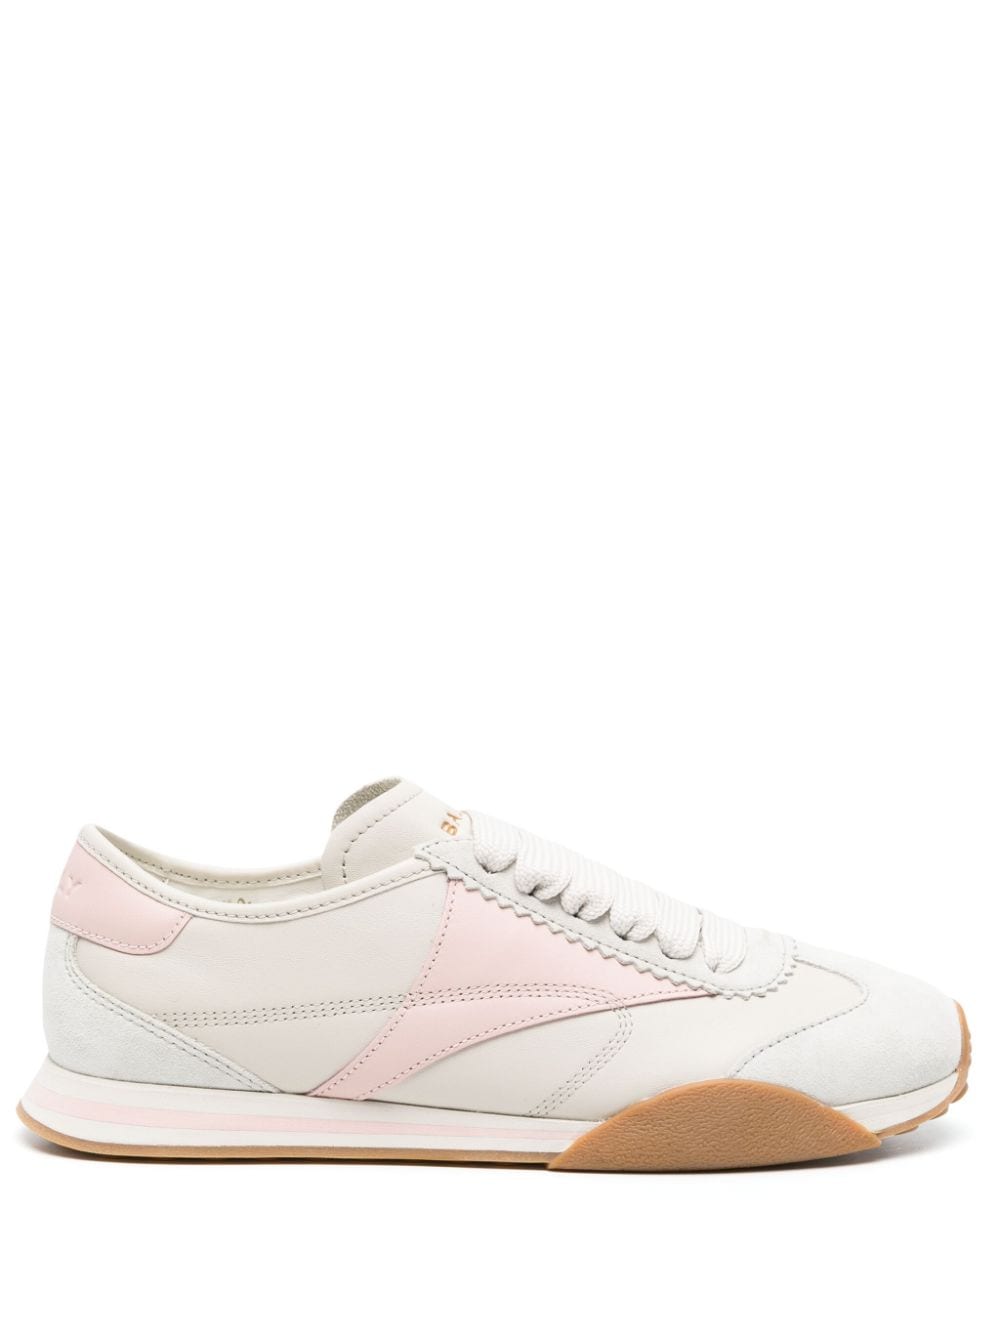 BALLY SUSSEX LACE-UP SNEAKERS